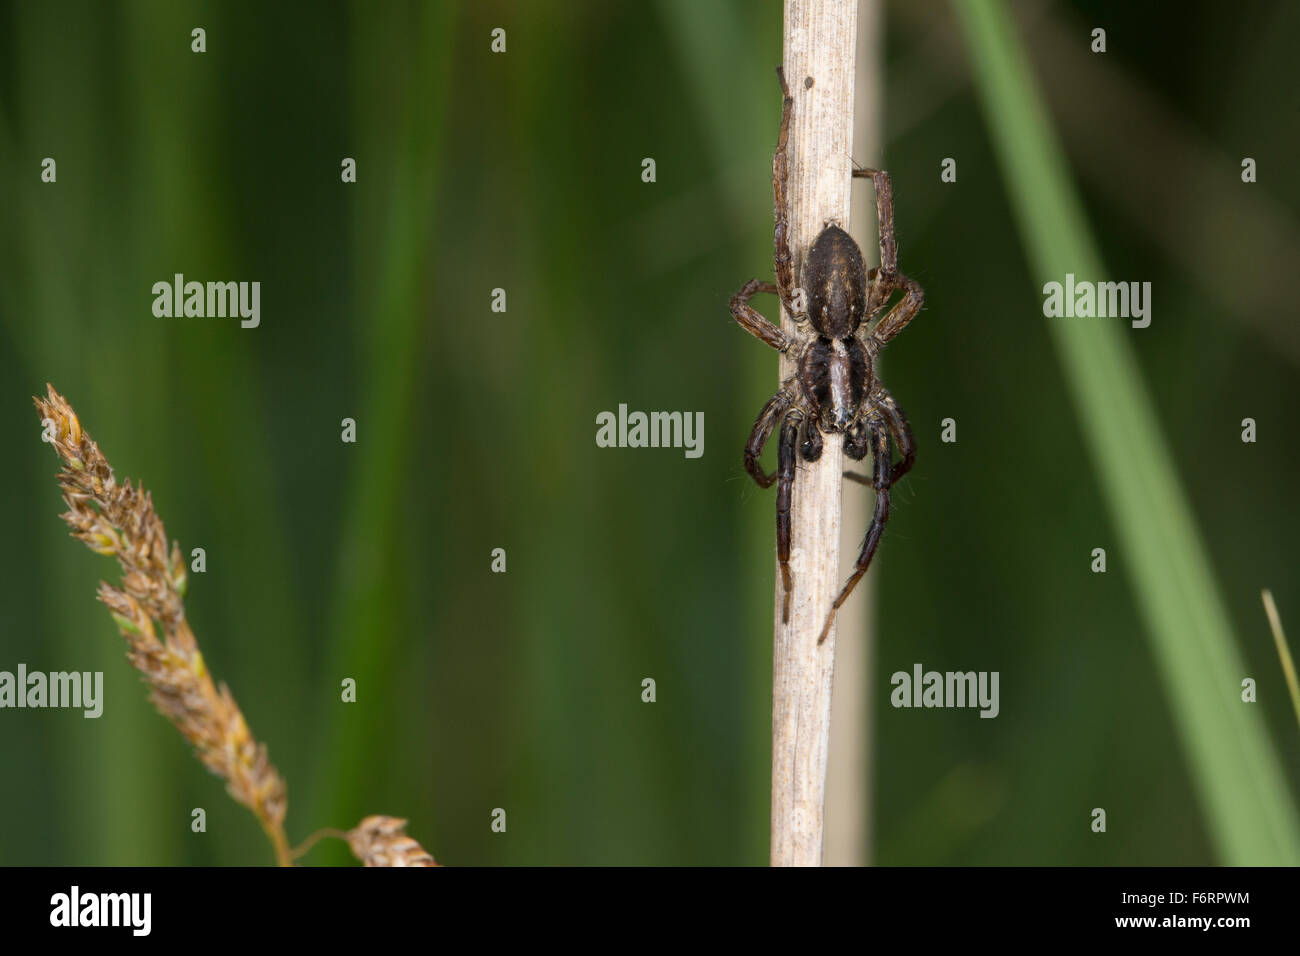 Wolf spider, lycoses, homme, Pantherspinne Panterspinne Wolfspinne,,, Männchen, Alopecosa spec., Lycosidae, Wolfspinnen Banque D'Images